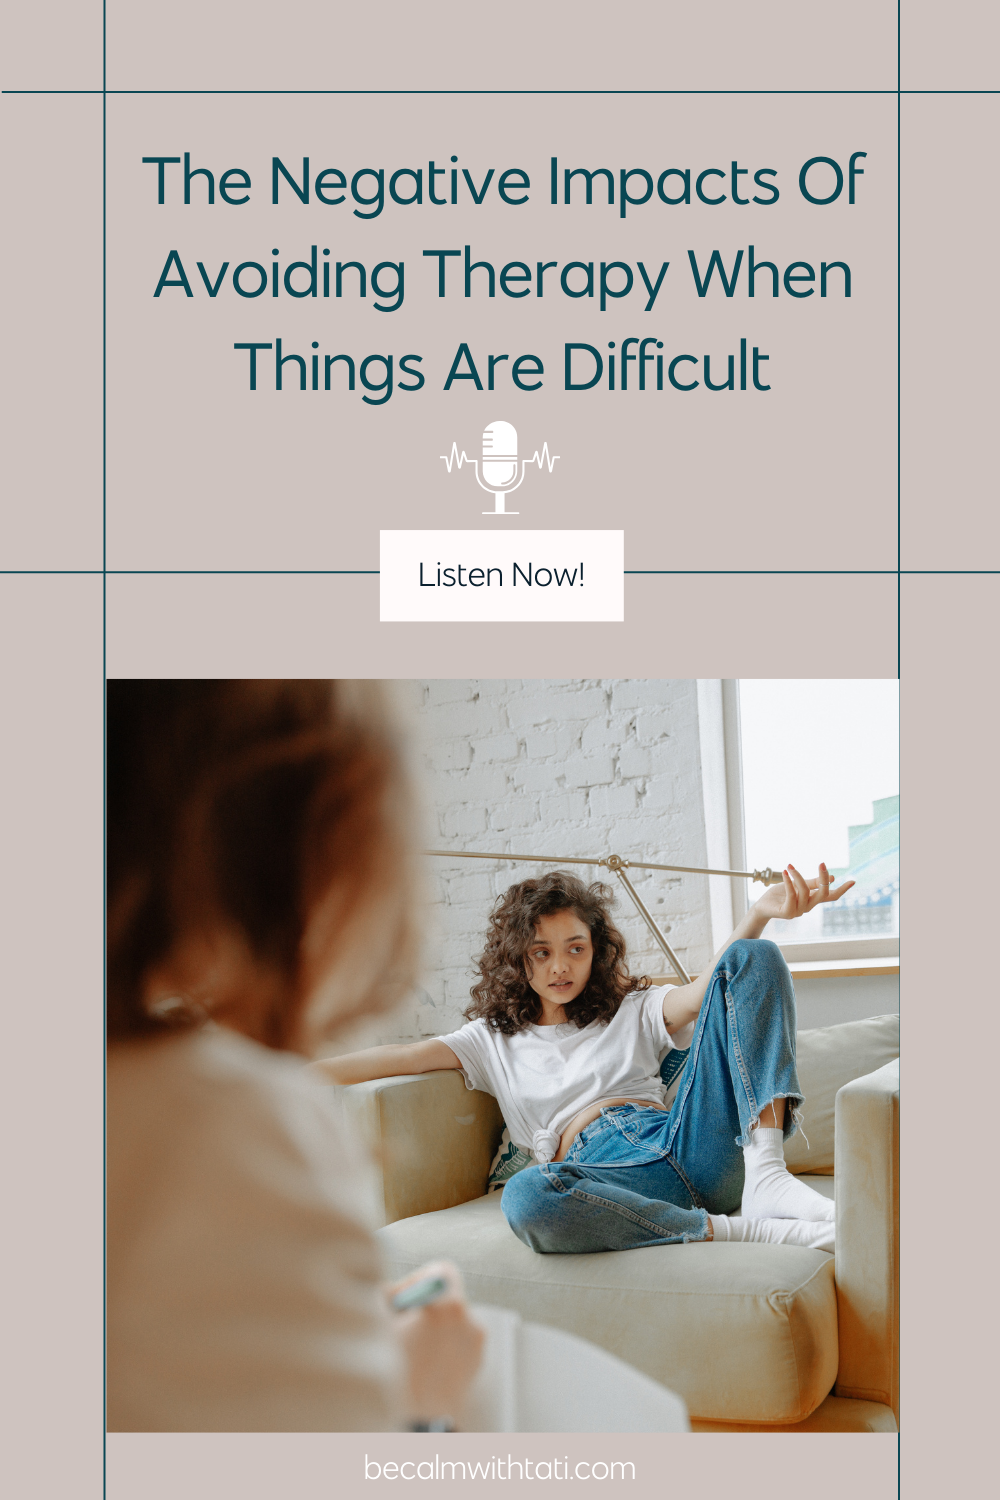 Afraid to go to therapy? Here’s what to do.